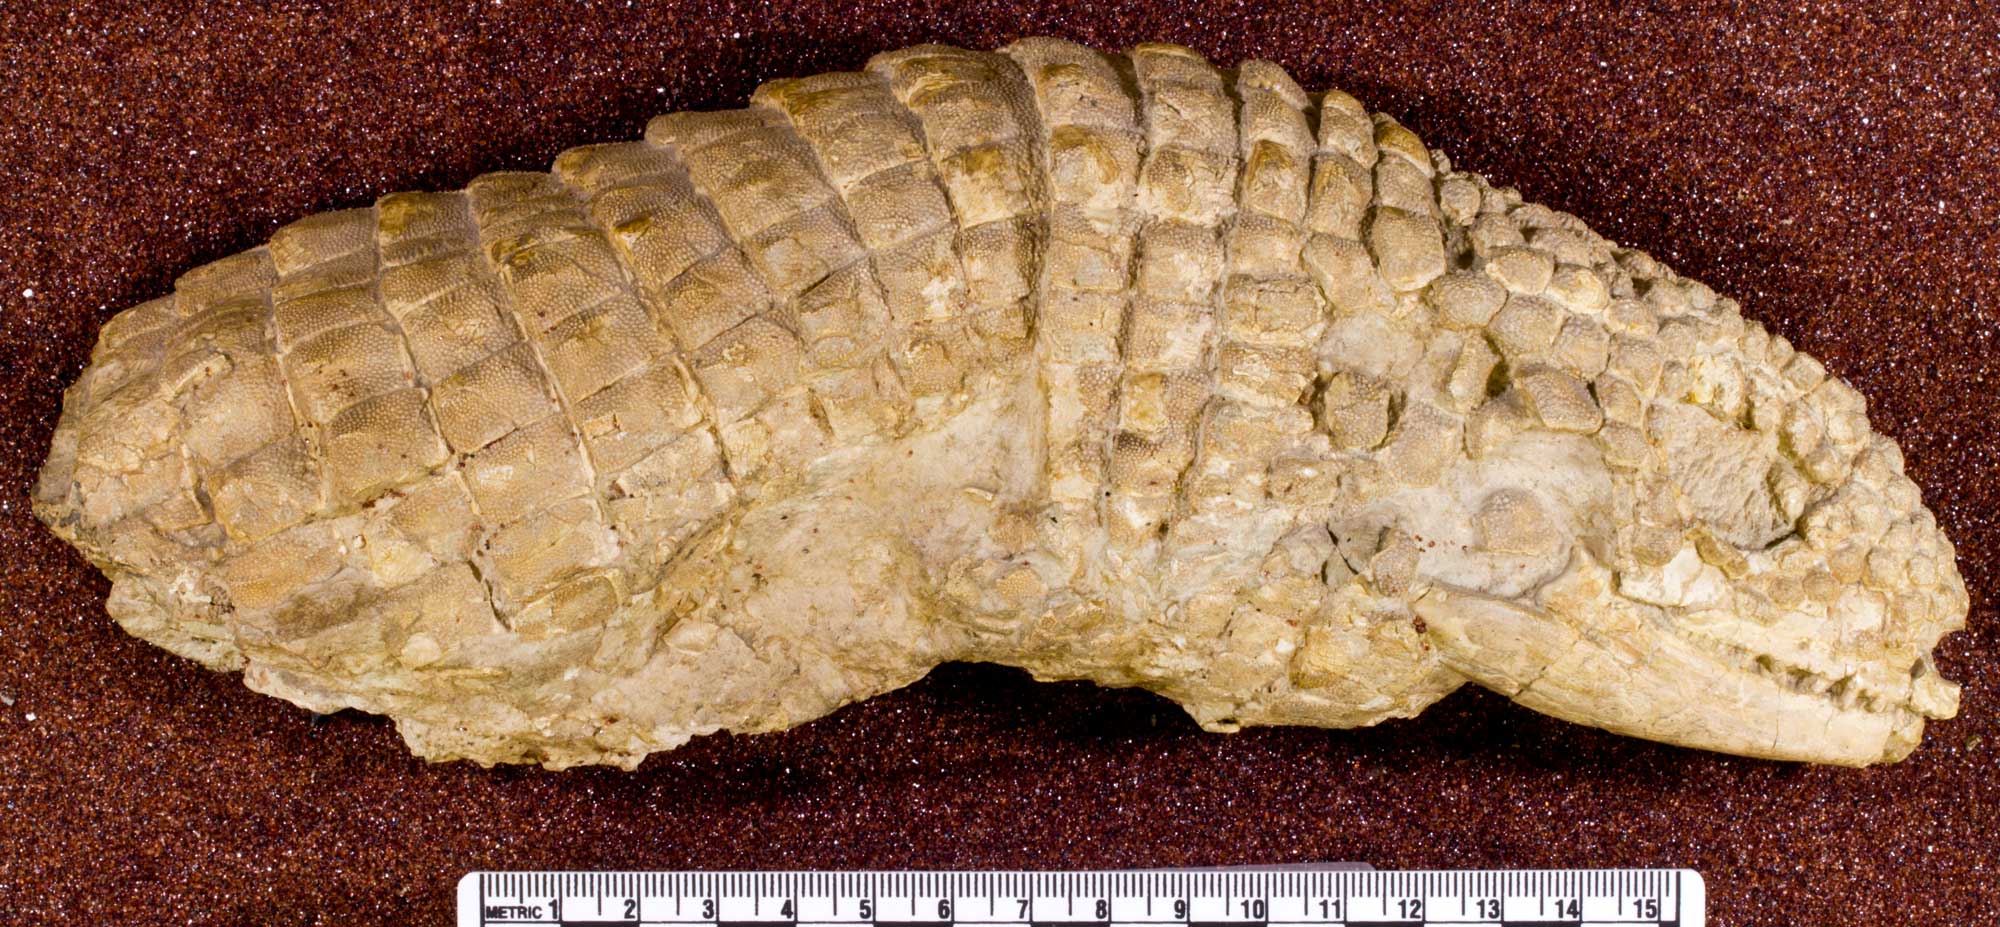 Photograph of a fossil beaded lizard from the Oligocene White River Group of Wyoming. The photo shows the front part of the lizard, including the skull, covered with osteoderms (bony plates). The forelimbs and back part of the body appear to be missing.